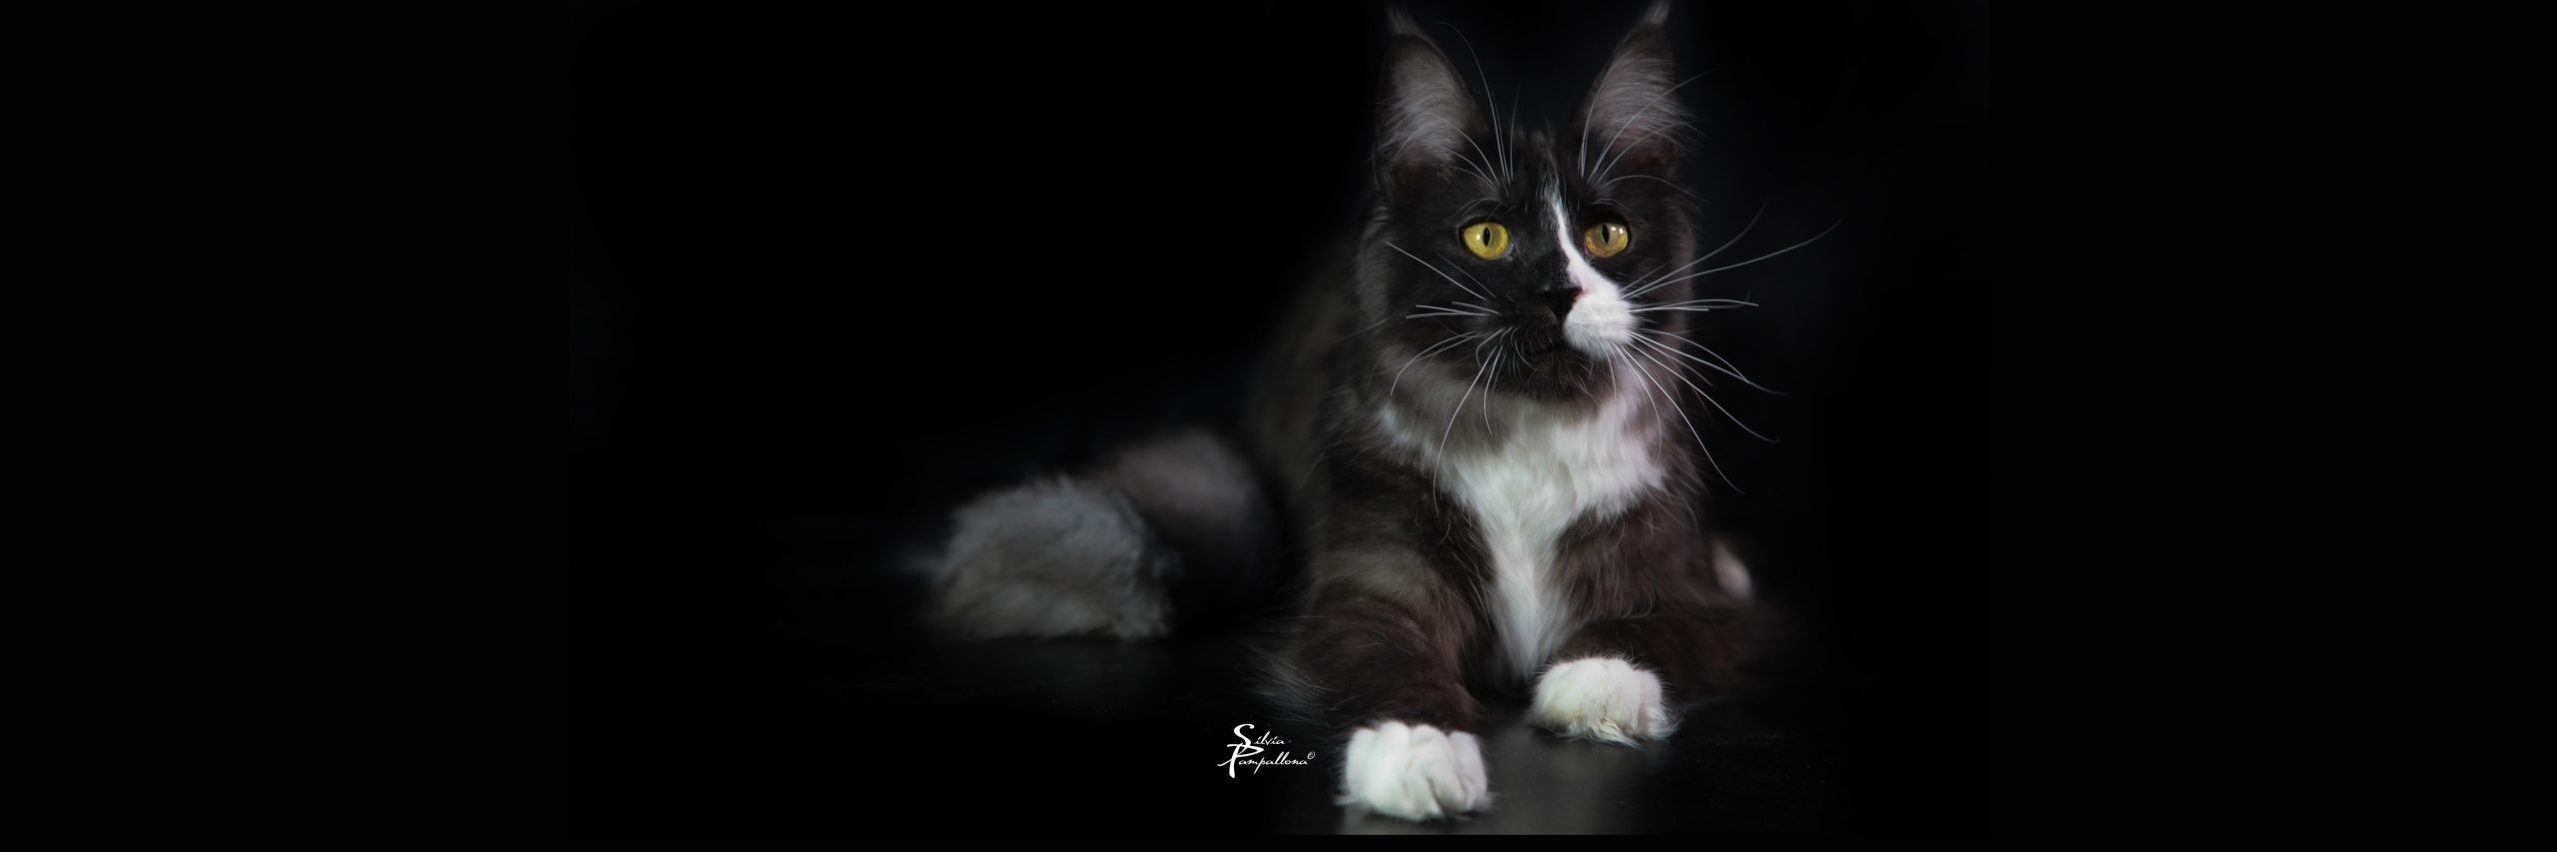 Orrono Maine Coons